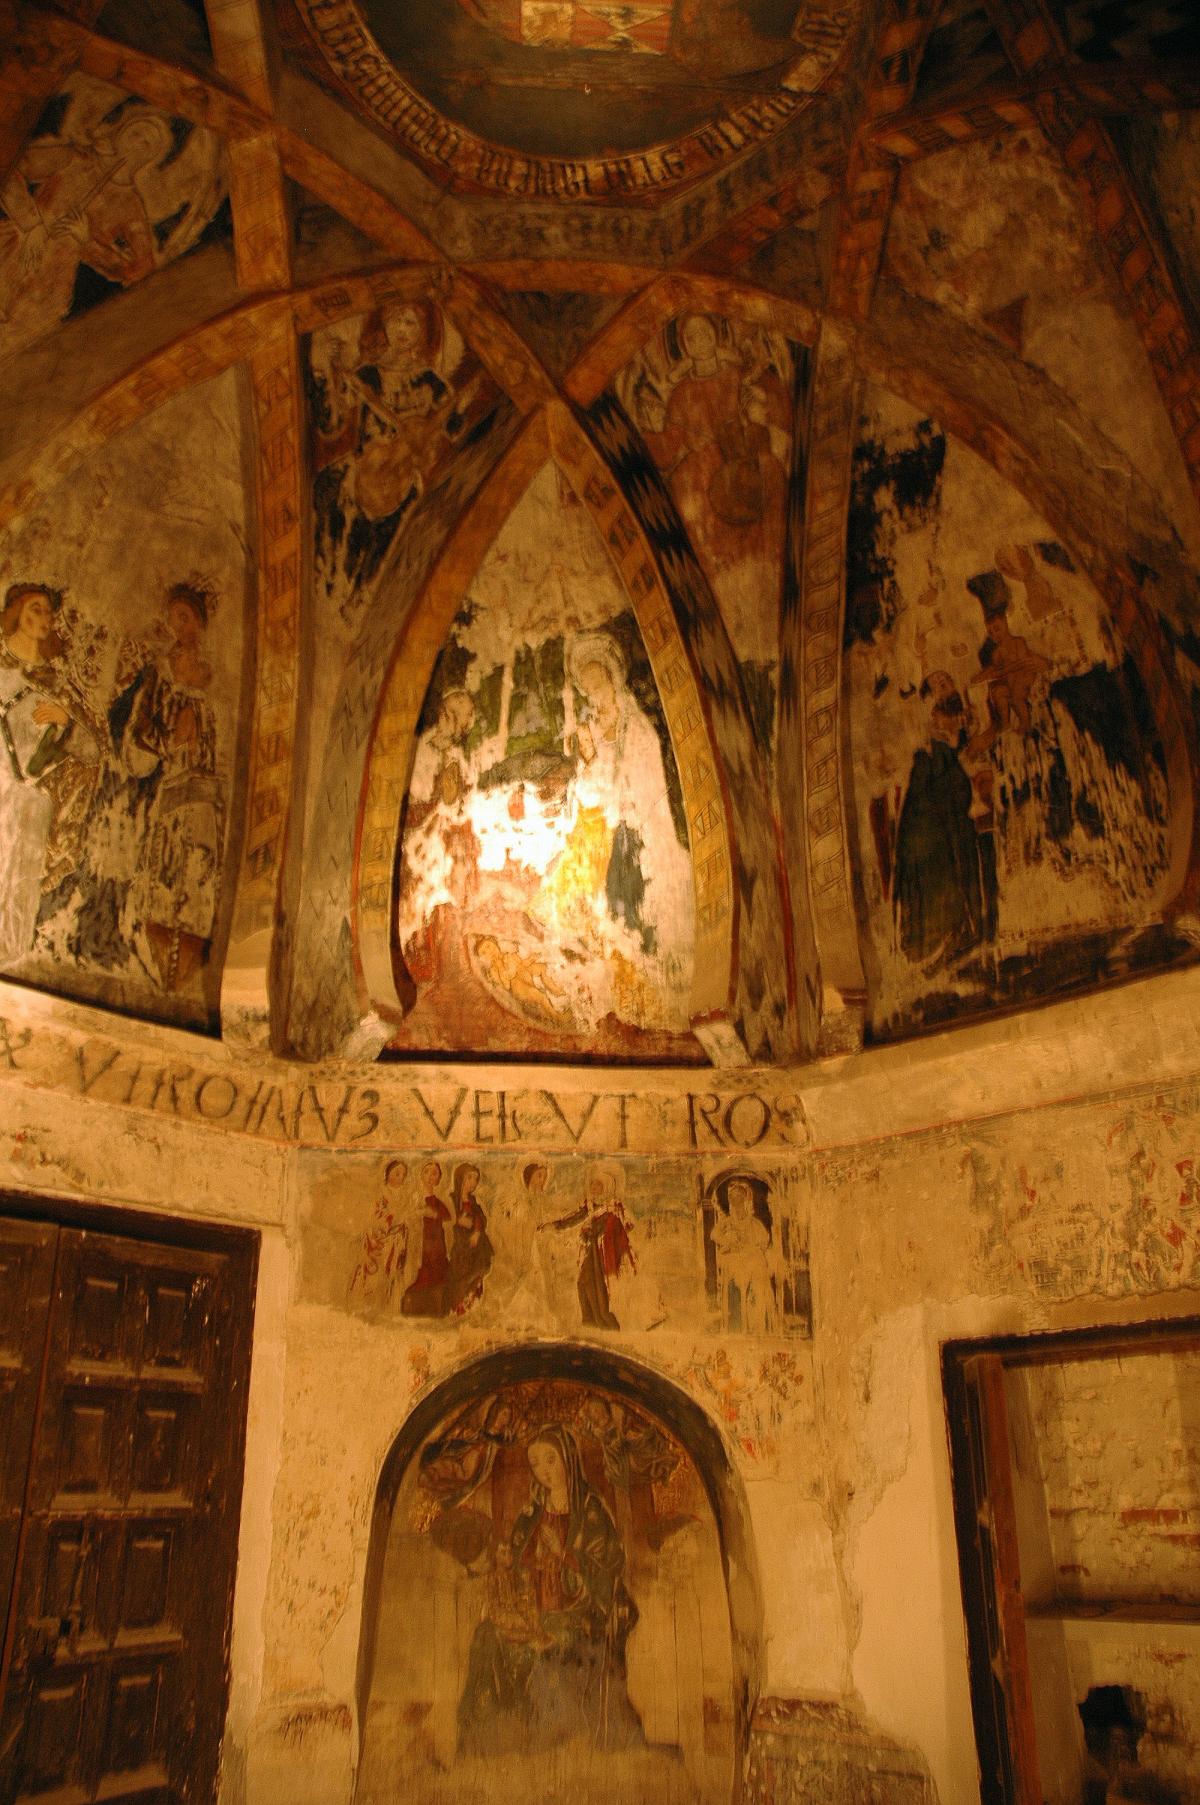 Paintings of saints adorn the vaulted ceiling, lit by torchlight